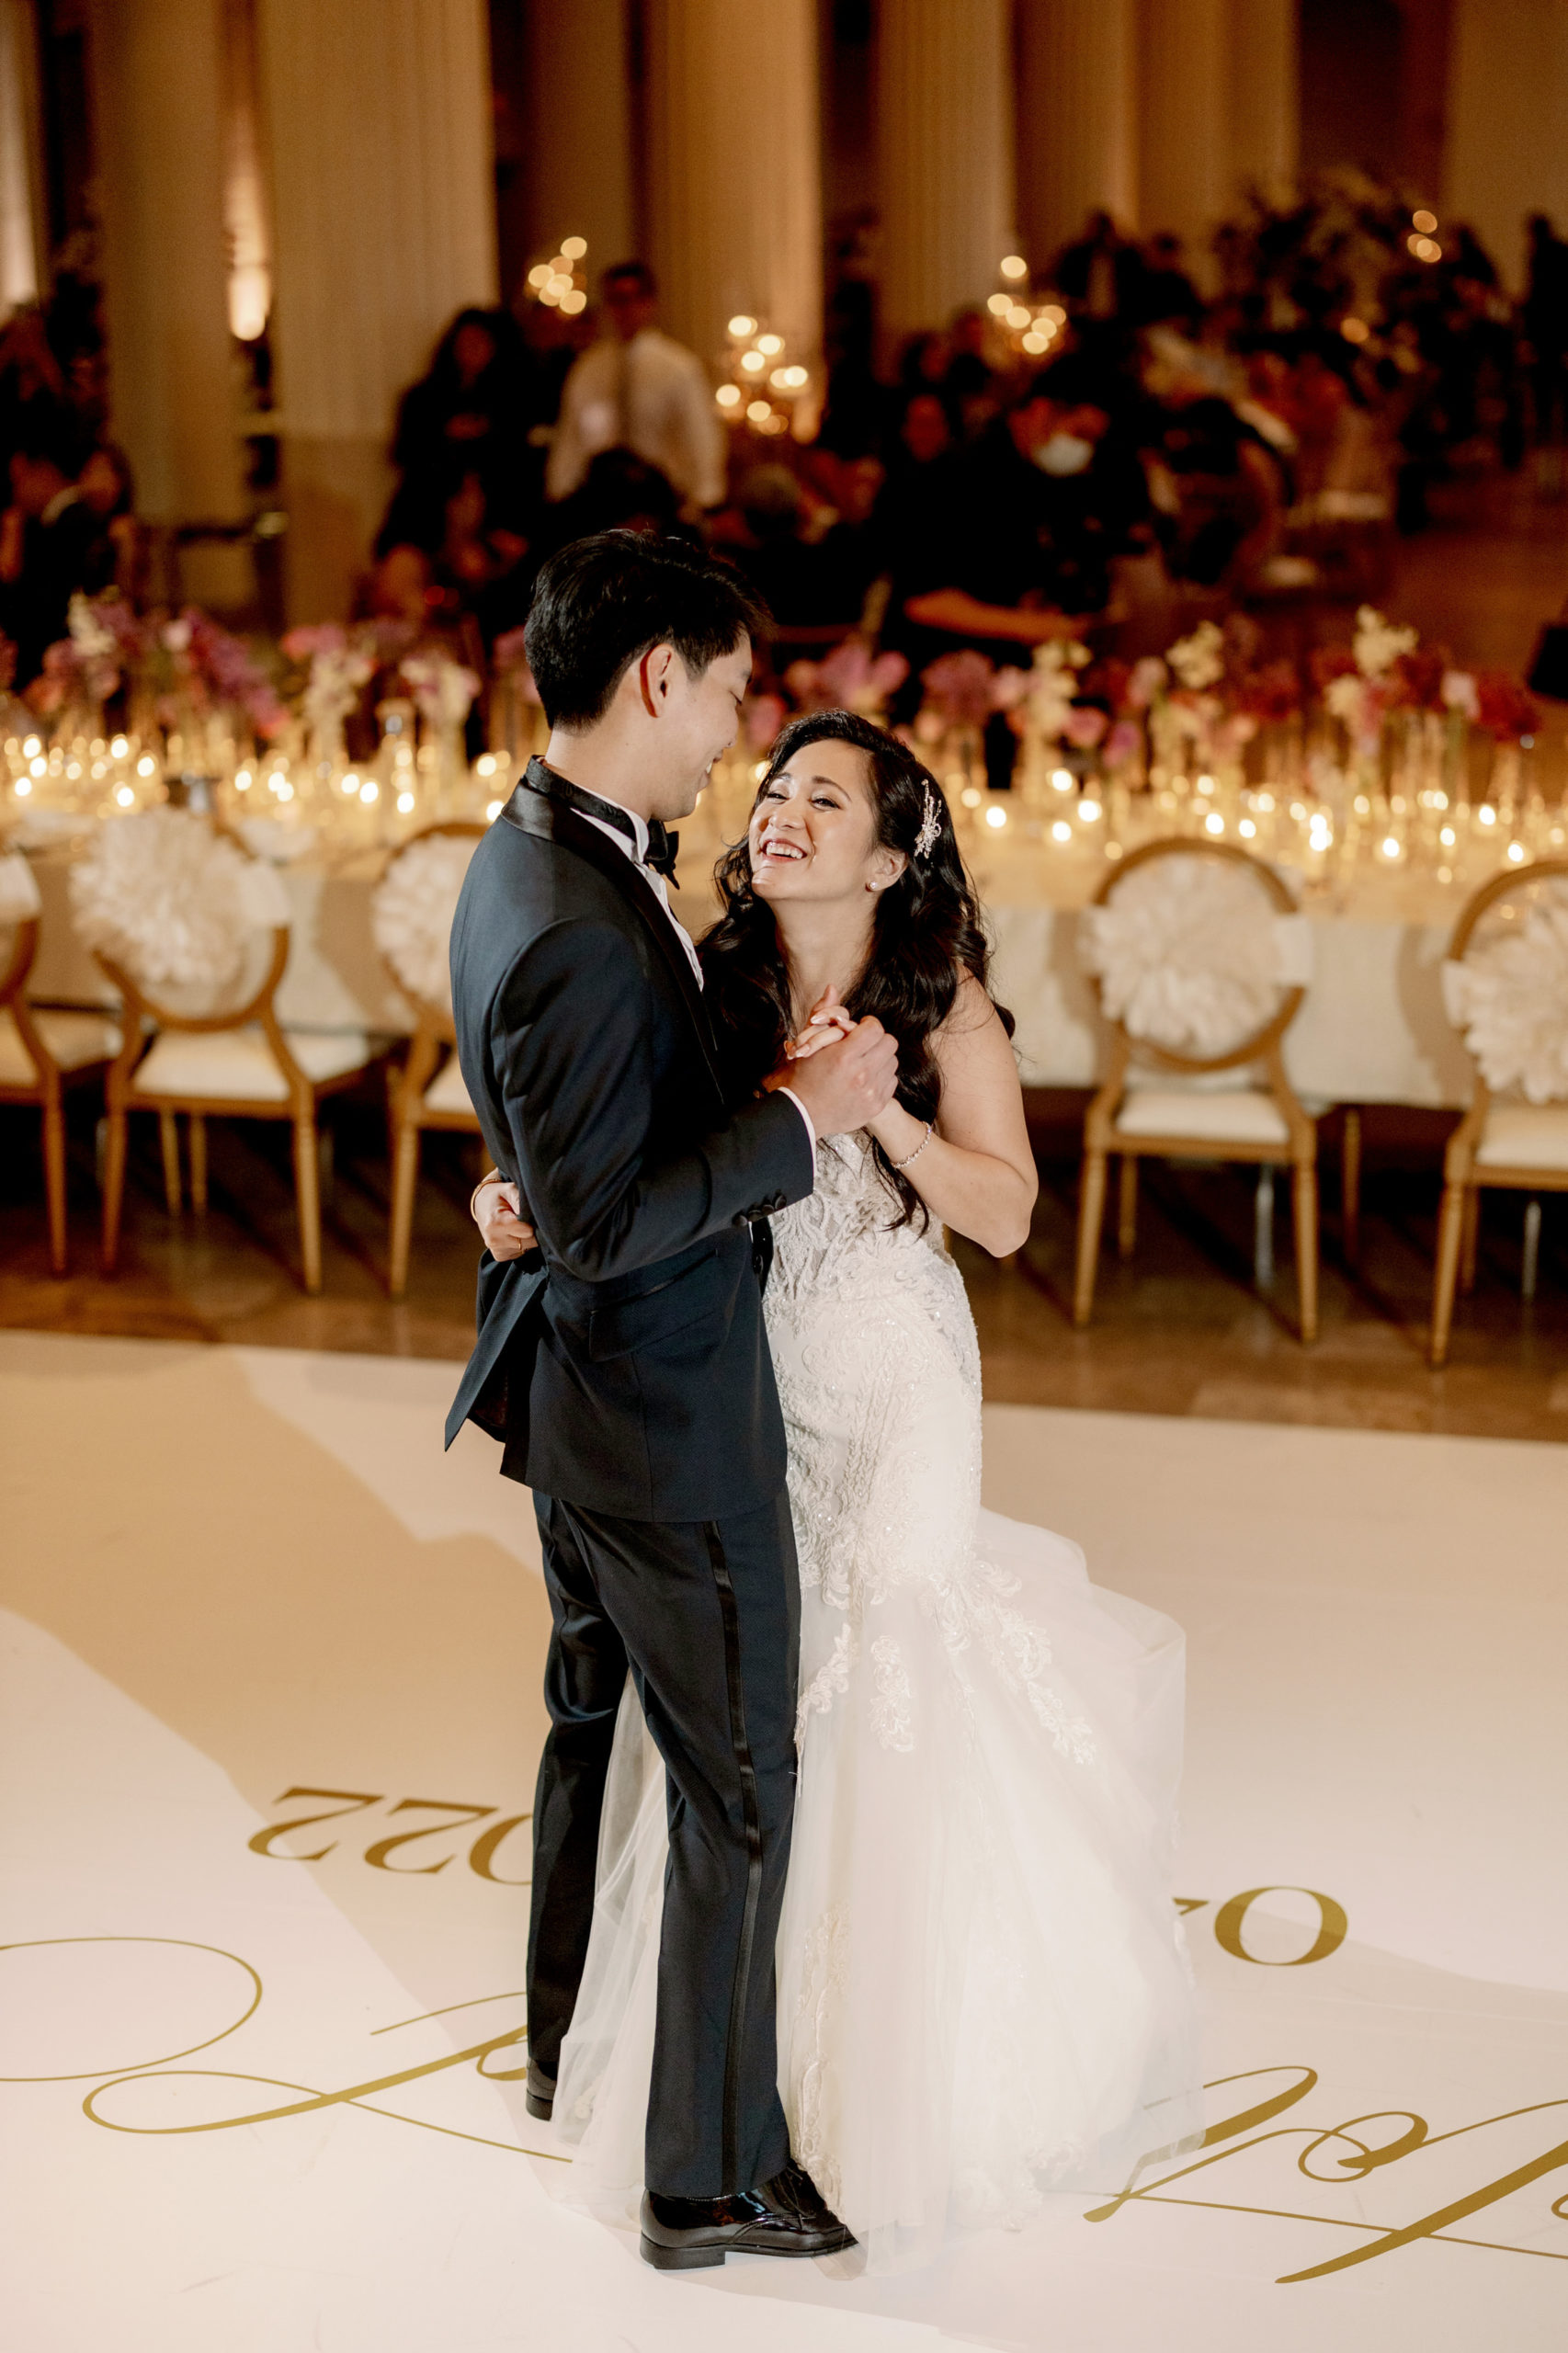 The newly-weds are dancing in the reception. Luxury wedding photography image by Jenny Fu Studio